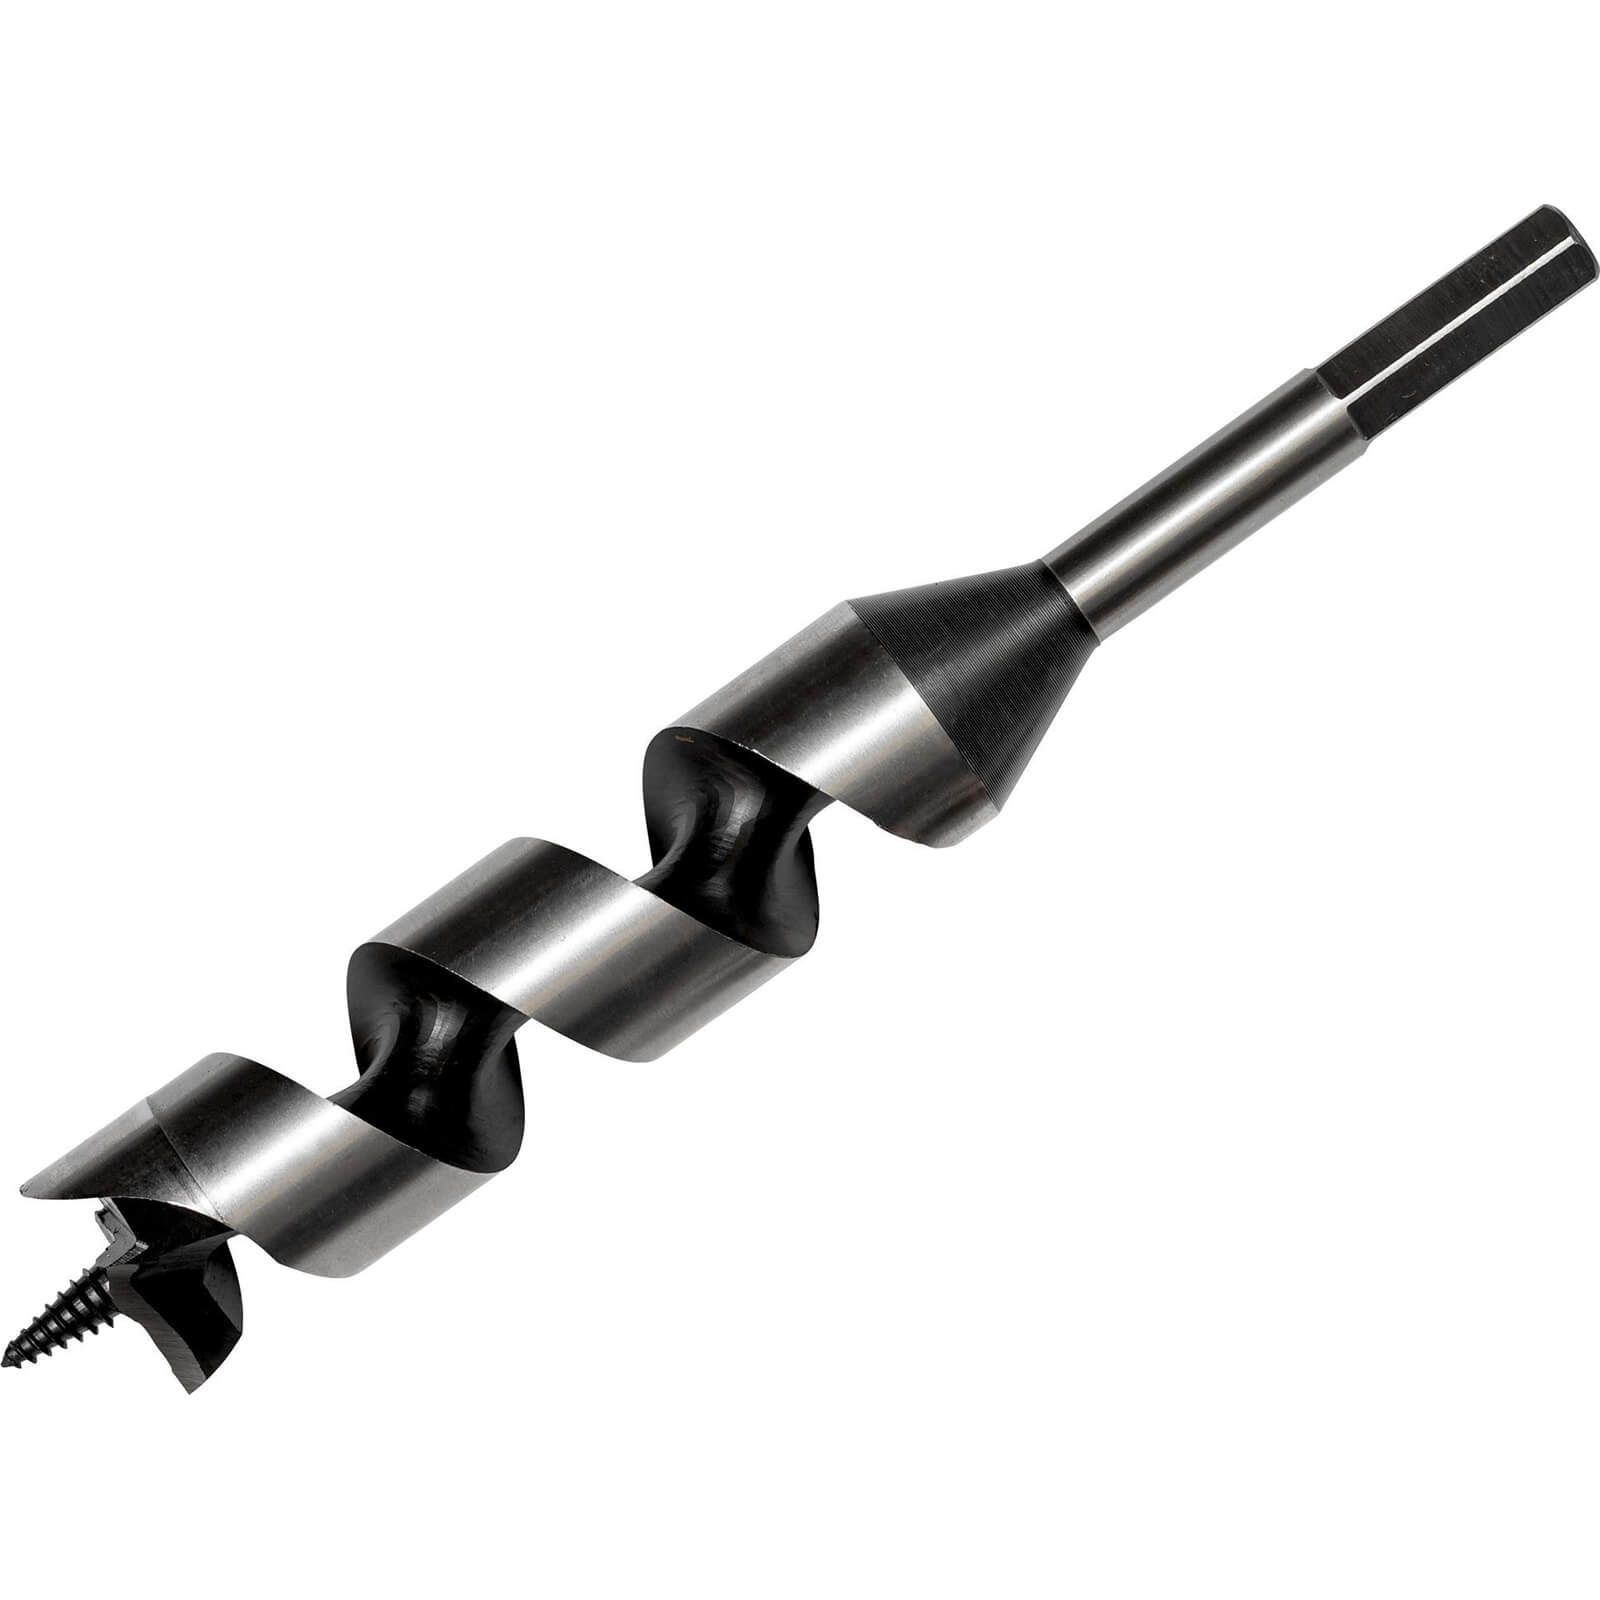 Image of Bahco 9626 Series Combination Auger Drill Bit 11mm 230mm